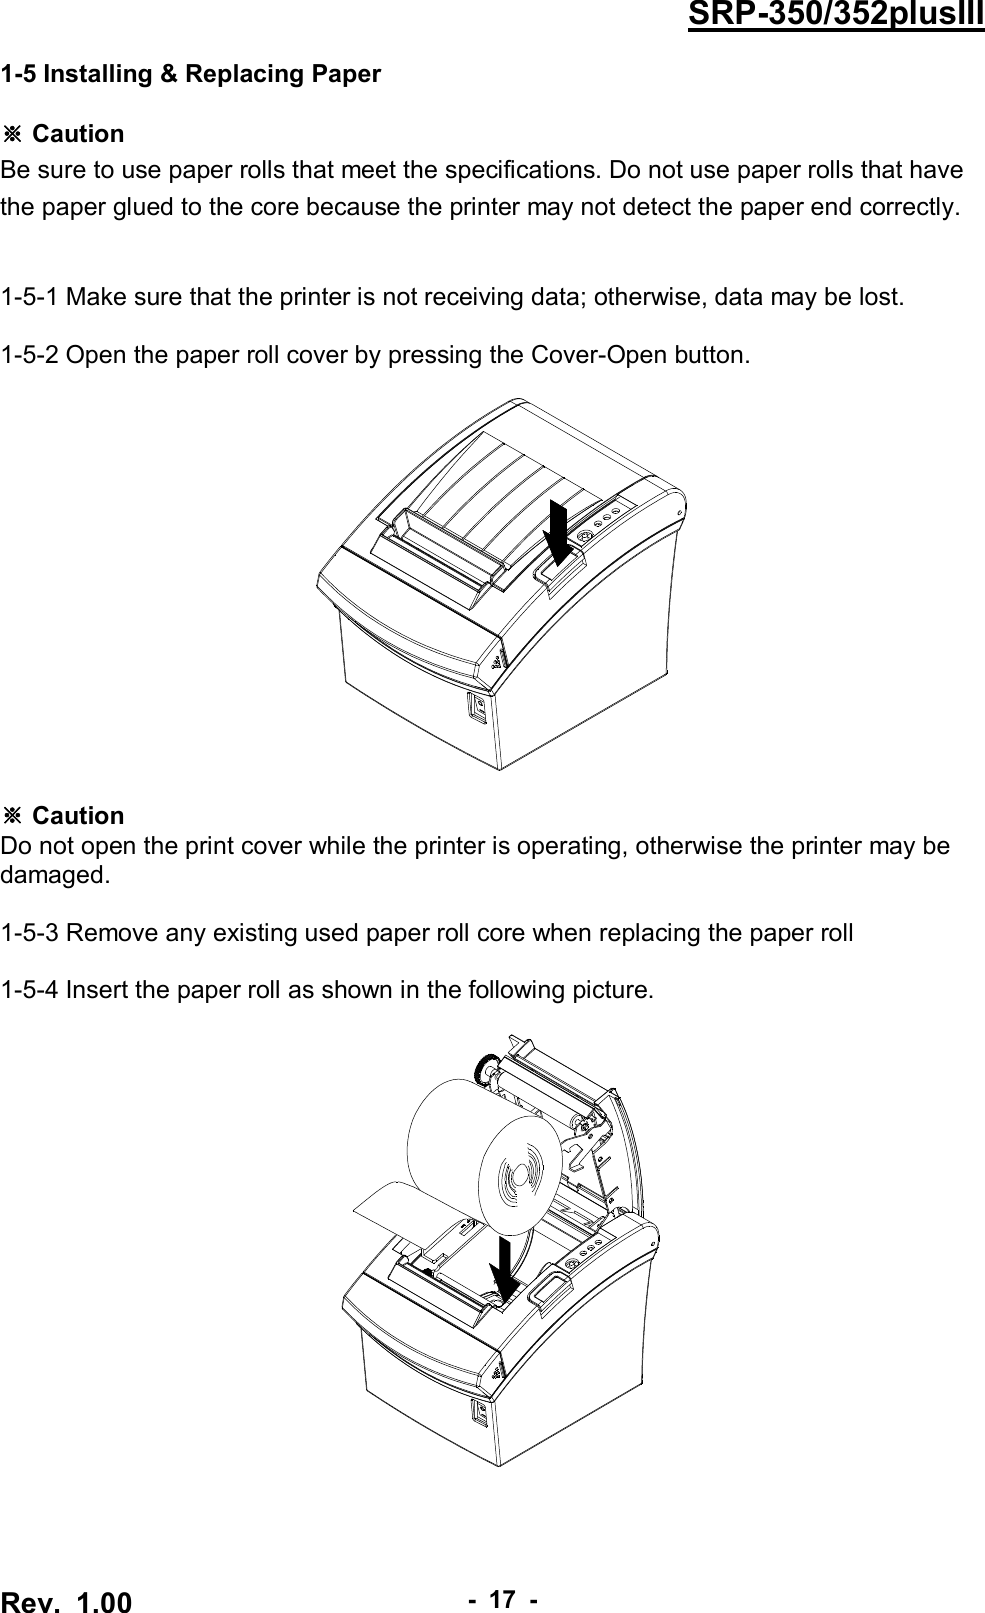  Rev.  1.00 - 17 - SRP-350/352plusIII 1-5 Installing &amp; Replacing Paper  ※ Caution Be sure to use paper rolls that meet the specifications. Do not use paper rolls that have the paper glued to the core because the printer may not detect the paper end correctly.     1-5-1 Make sure that the printer is not receiving data; otherwise, data may be lost.  1-5-2 Open the paper roll cover by pressing the Cover-Open button.      ※ Caution Do not open the print cover while the printer is operating, otherwise the printer may be damaged.  1-5-3 Remove any existing used paper roll core when replacing the paper roll  1-5-4 Insert the paper roll as shown in the following picture.   